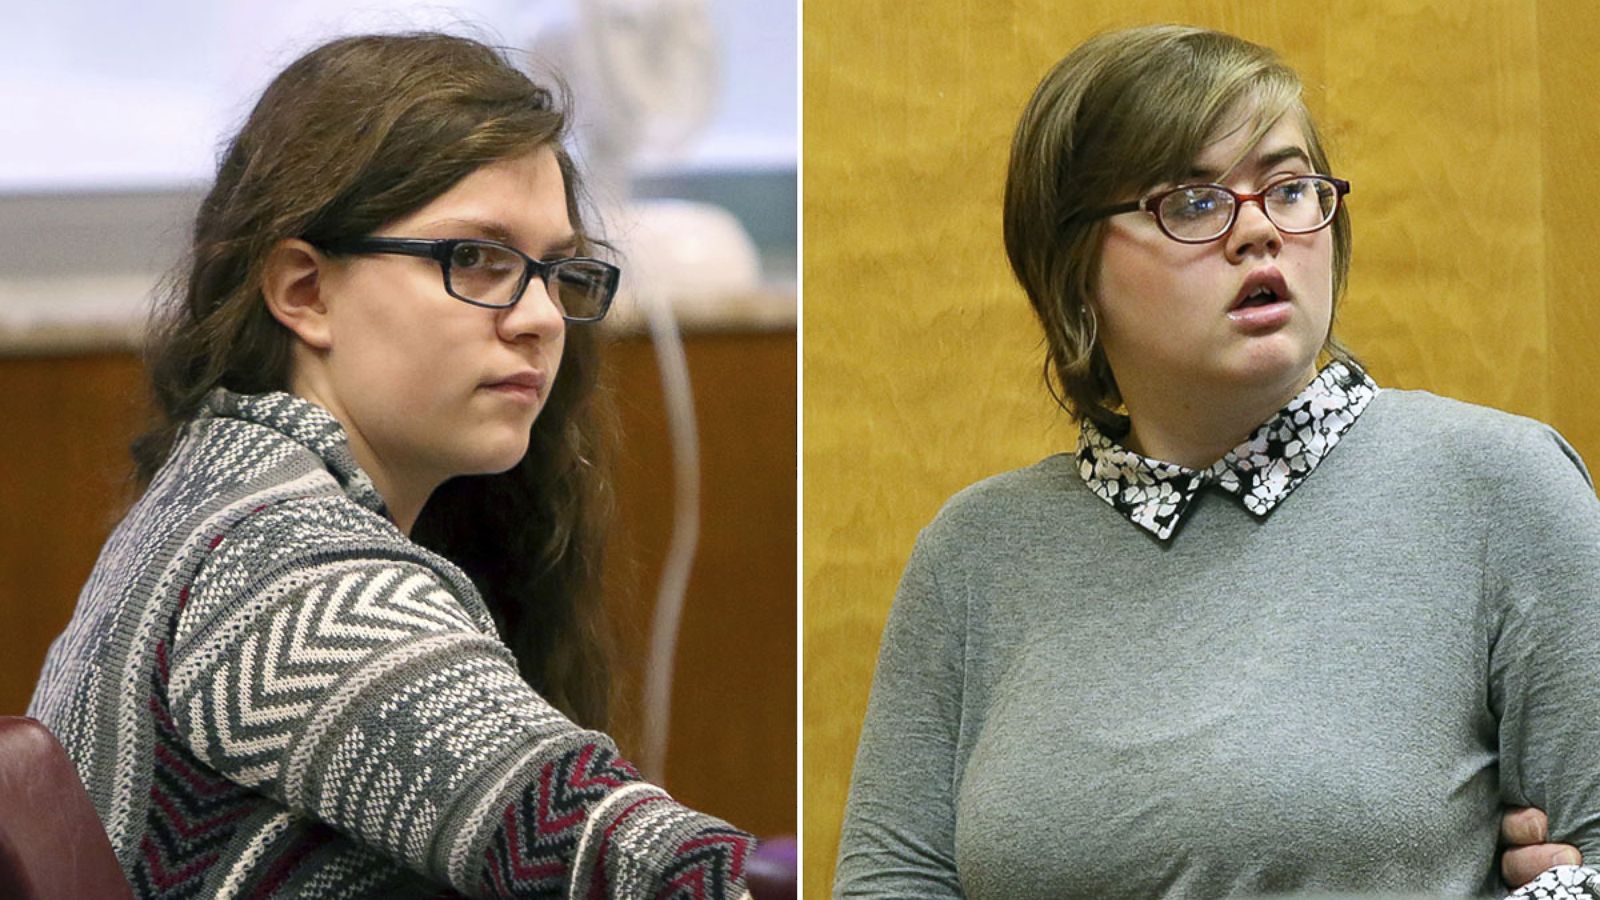 Mothers Of Teens Who Pleaded Guilty In Slender Man Stabbing Case Say There Were No Warning Signs Of Violence Abc News - slender man roblox avatar 2020